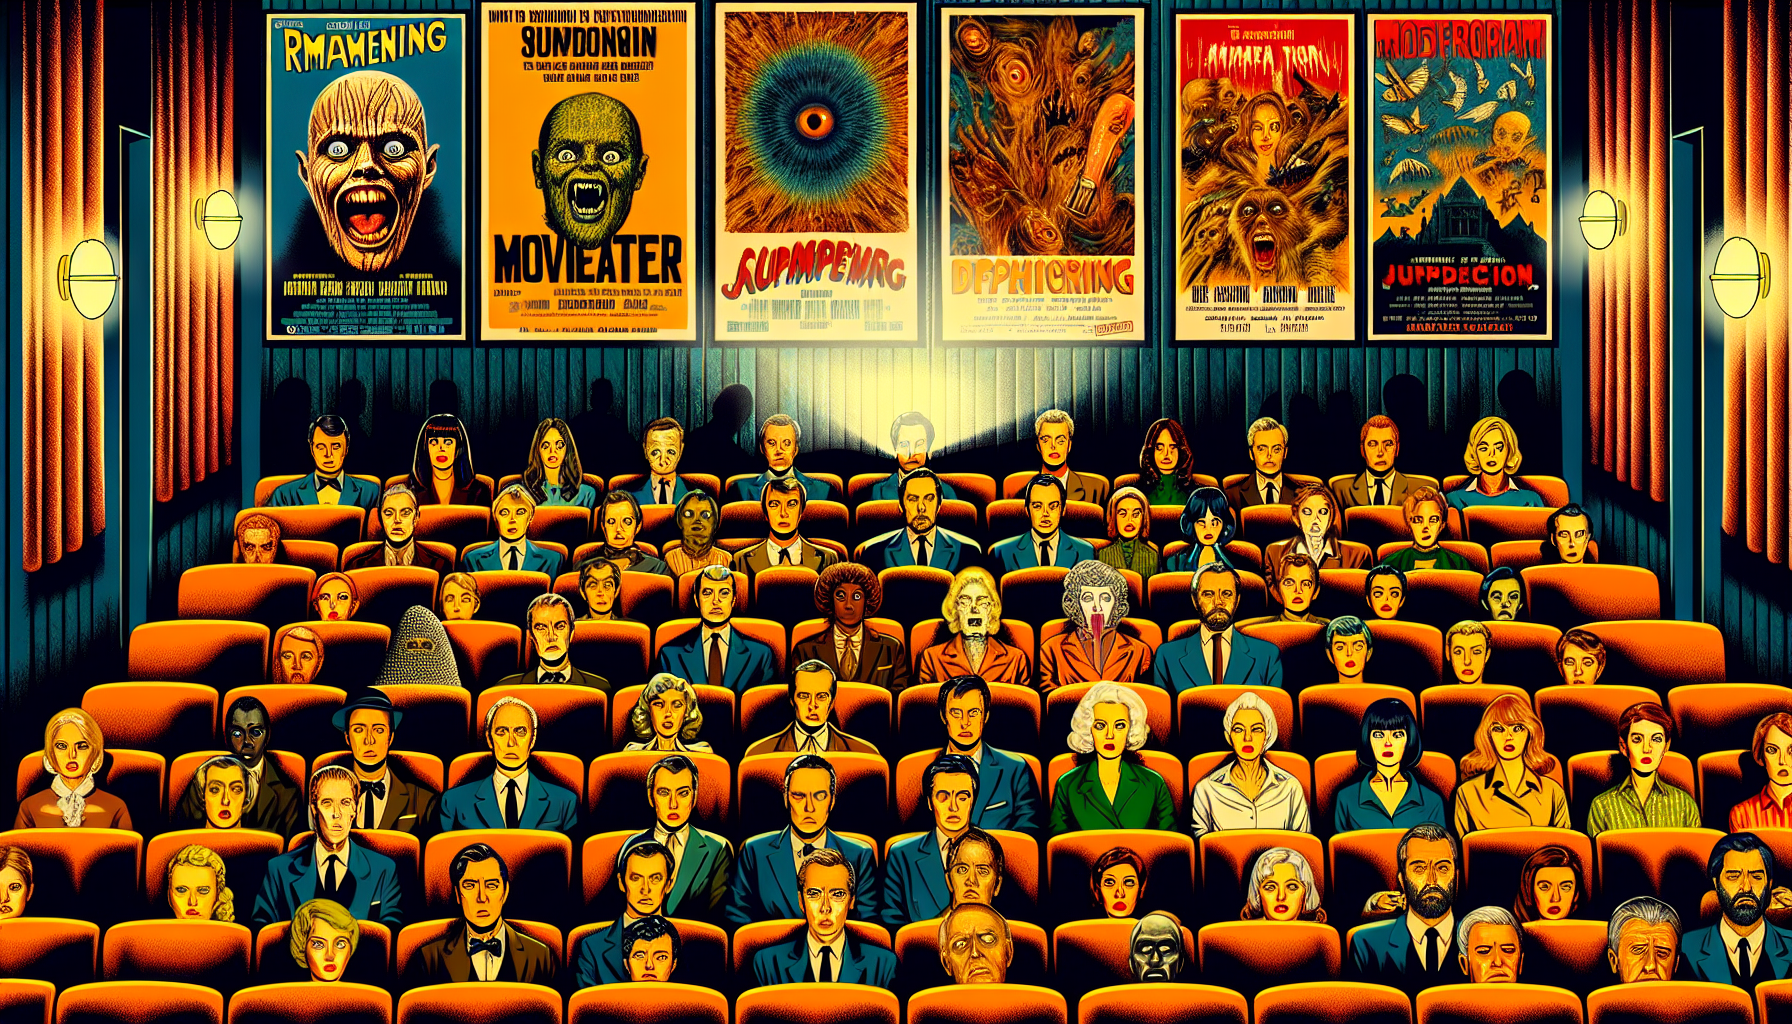 A vintage movie theater showcasing posters of iconic horror films with subtle social messages, inside a room filled with diverse viewers reacting differently: some look terrified, others contemplative